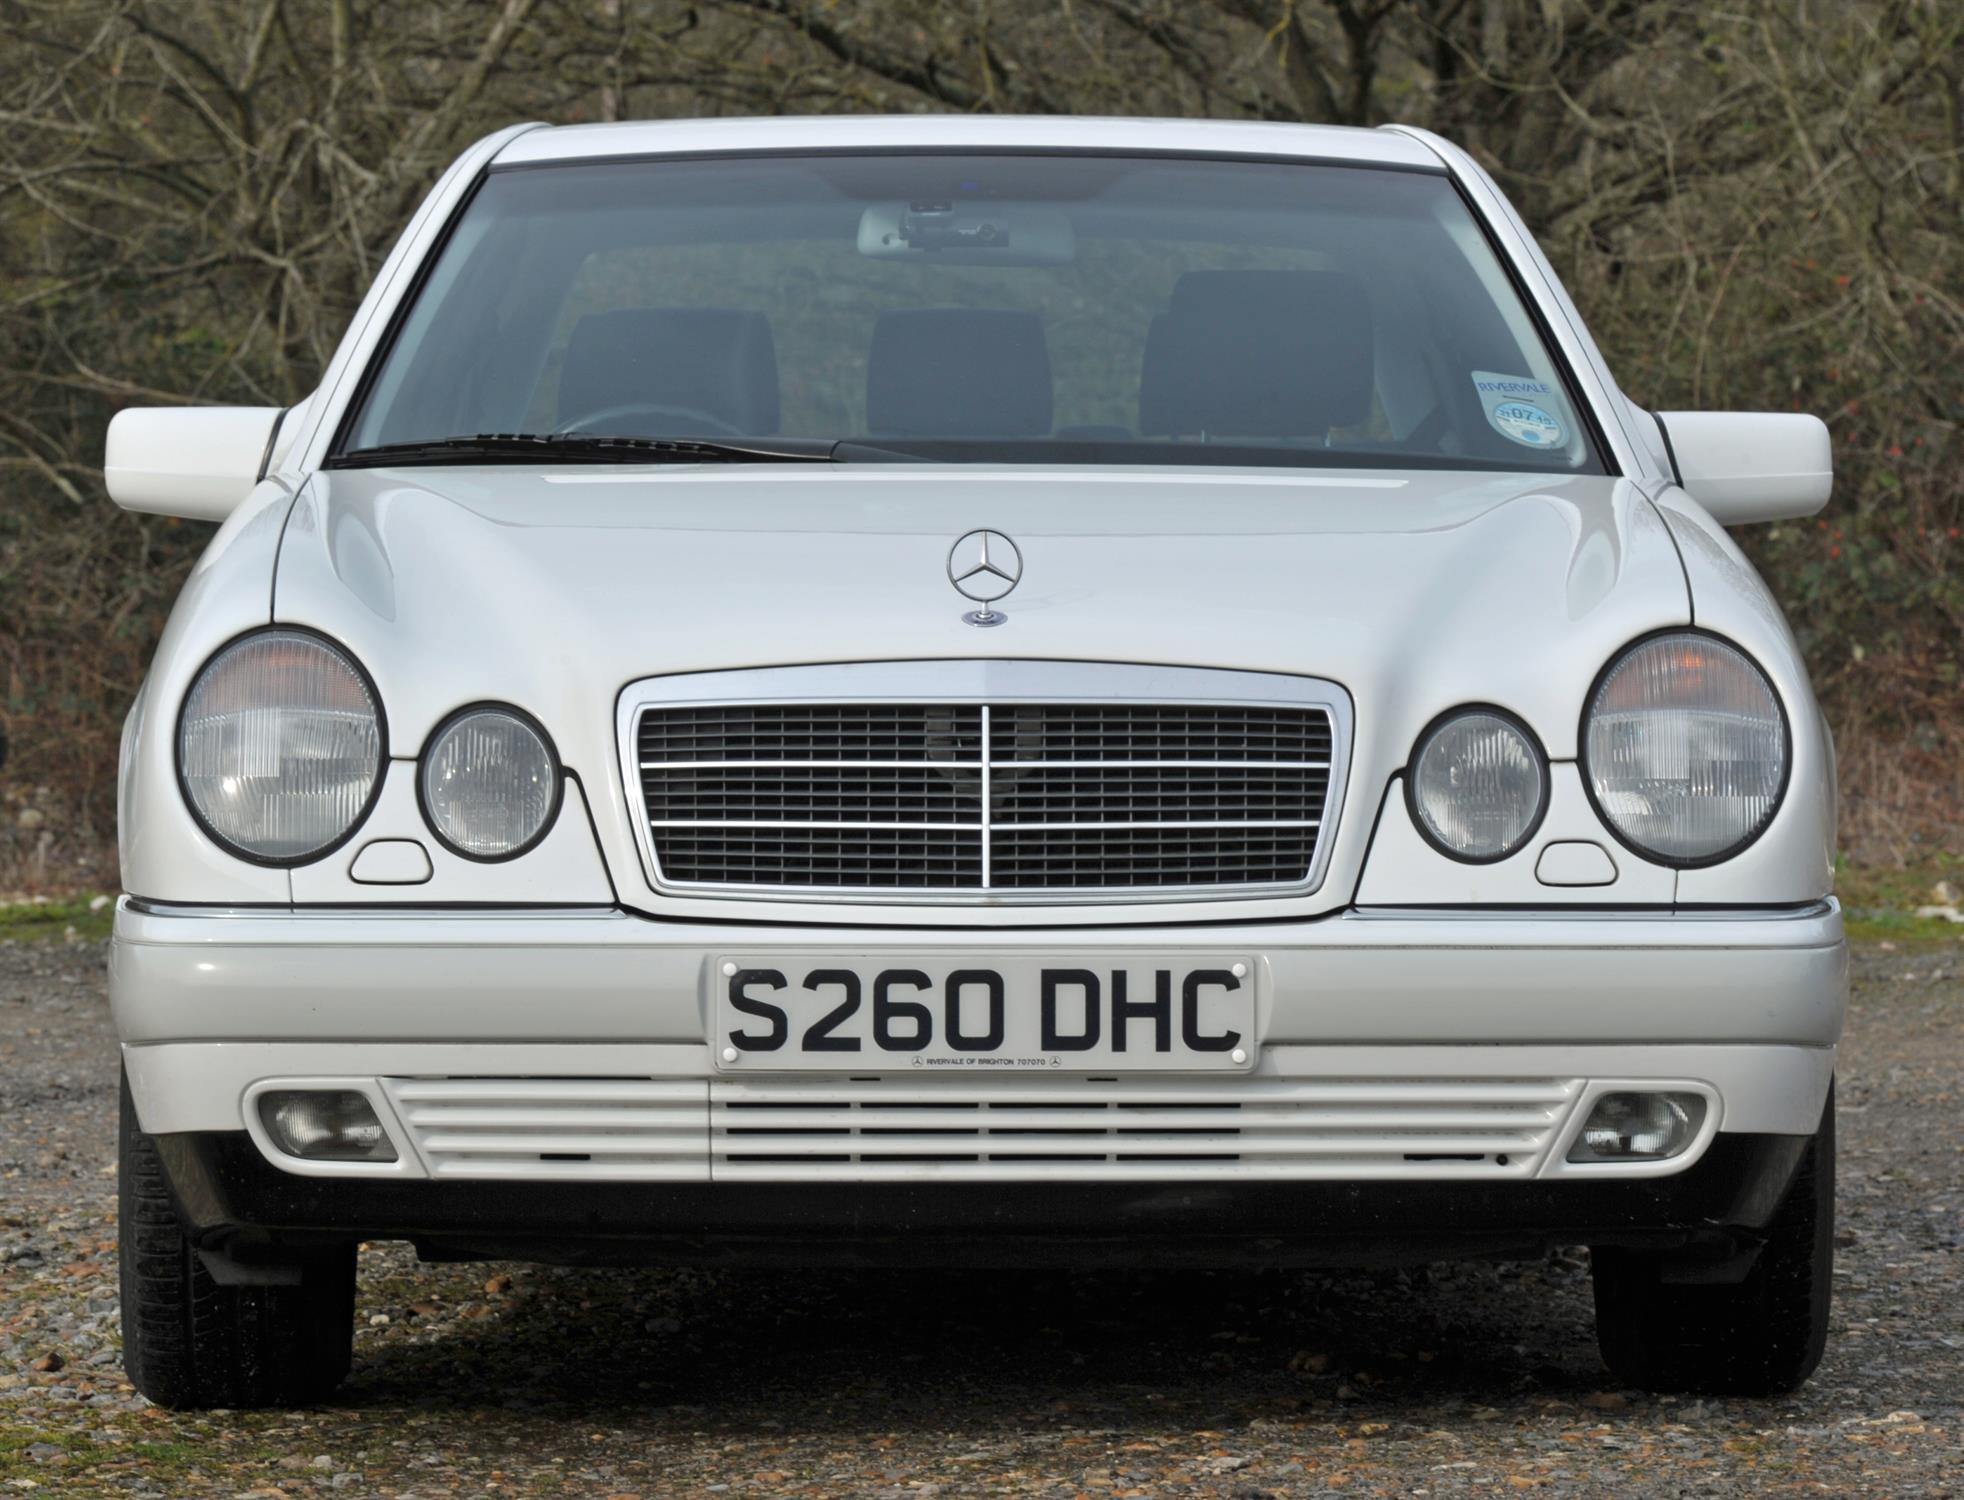 1998 Mercedes Benz E240 Elegance Saloon Petrol Automatic. Registration: S260 DHC. Mileage: 133, - Image 2 of 16